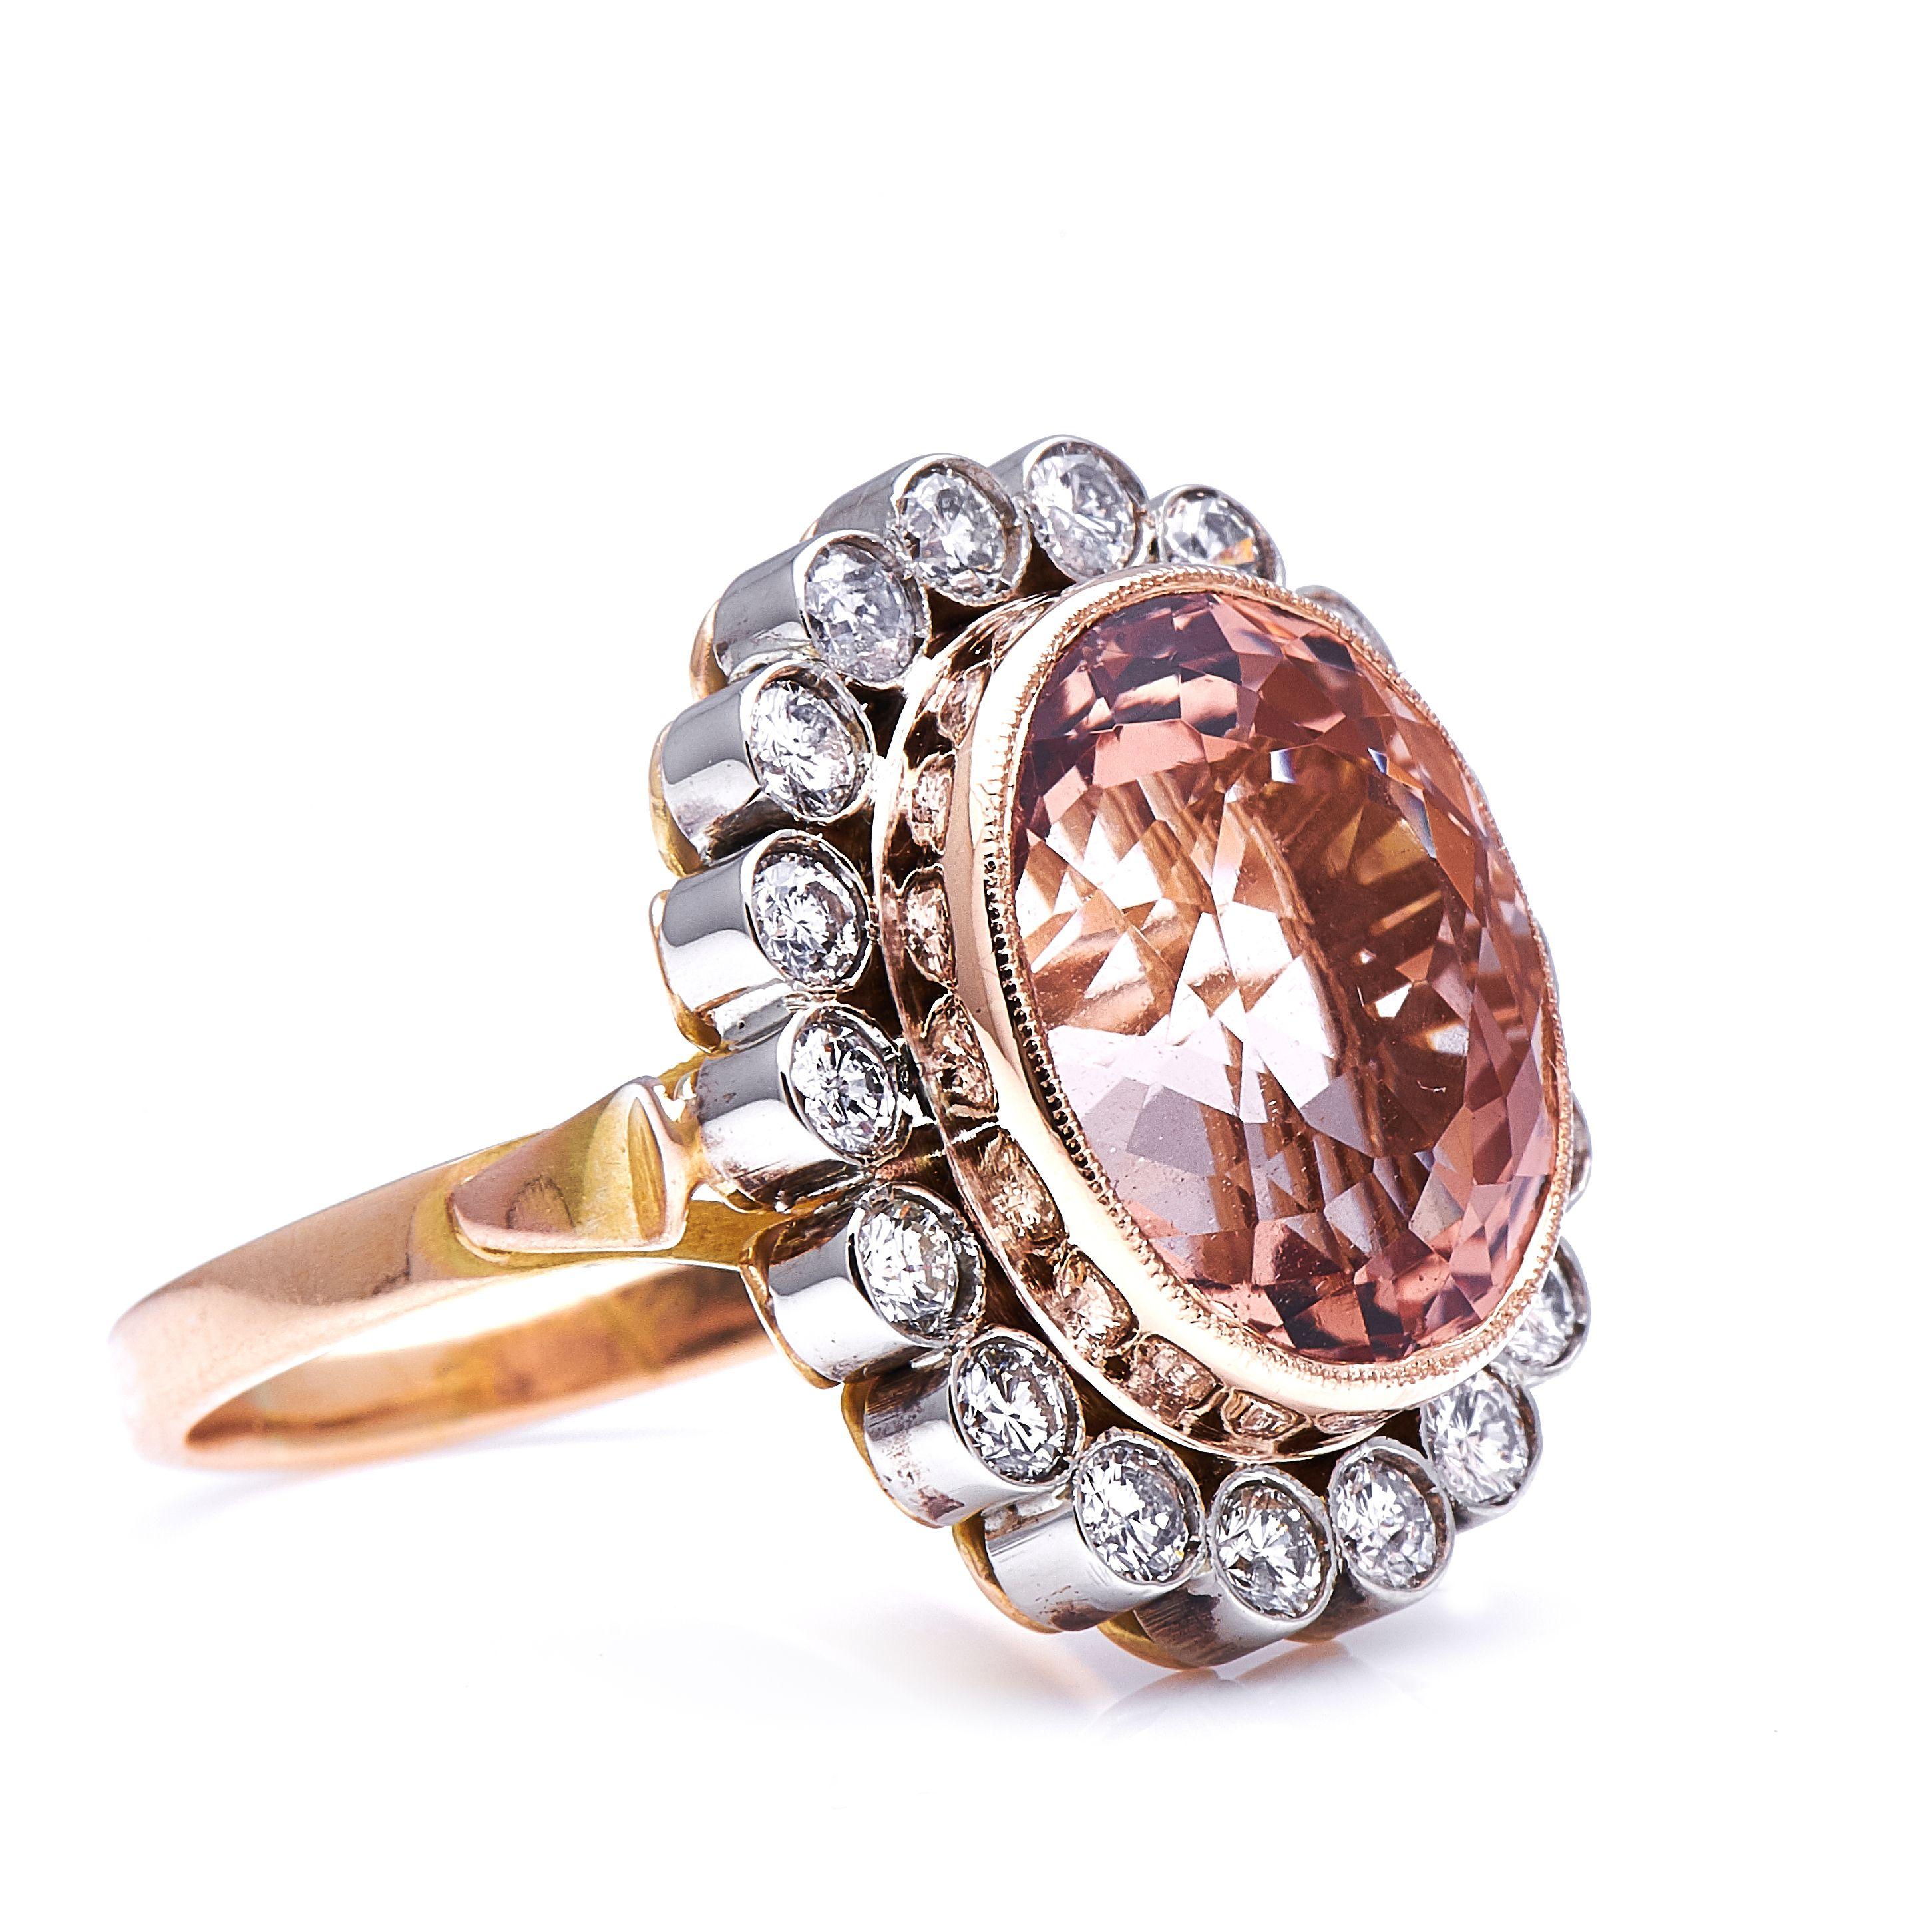 Morganite and diamond ring. Morganite is a variety of beryl, alongside its more widely known relatives aquamarine and emerald. What distinguishes morganite within its family is its pink hue, caused by traces of the element Manganese. Morganite is a